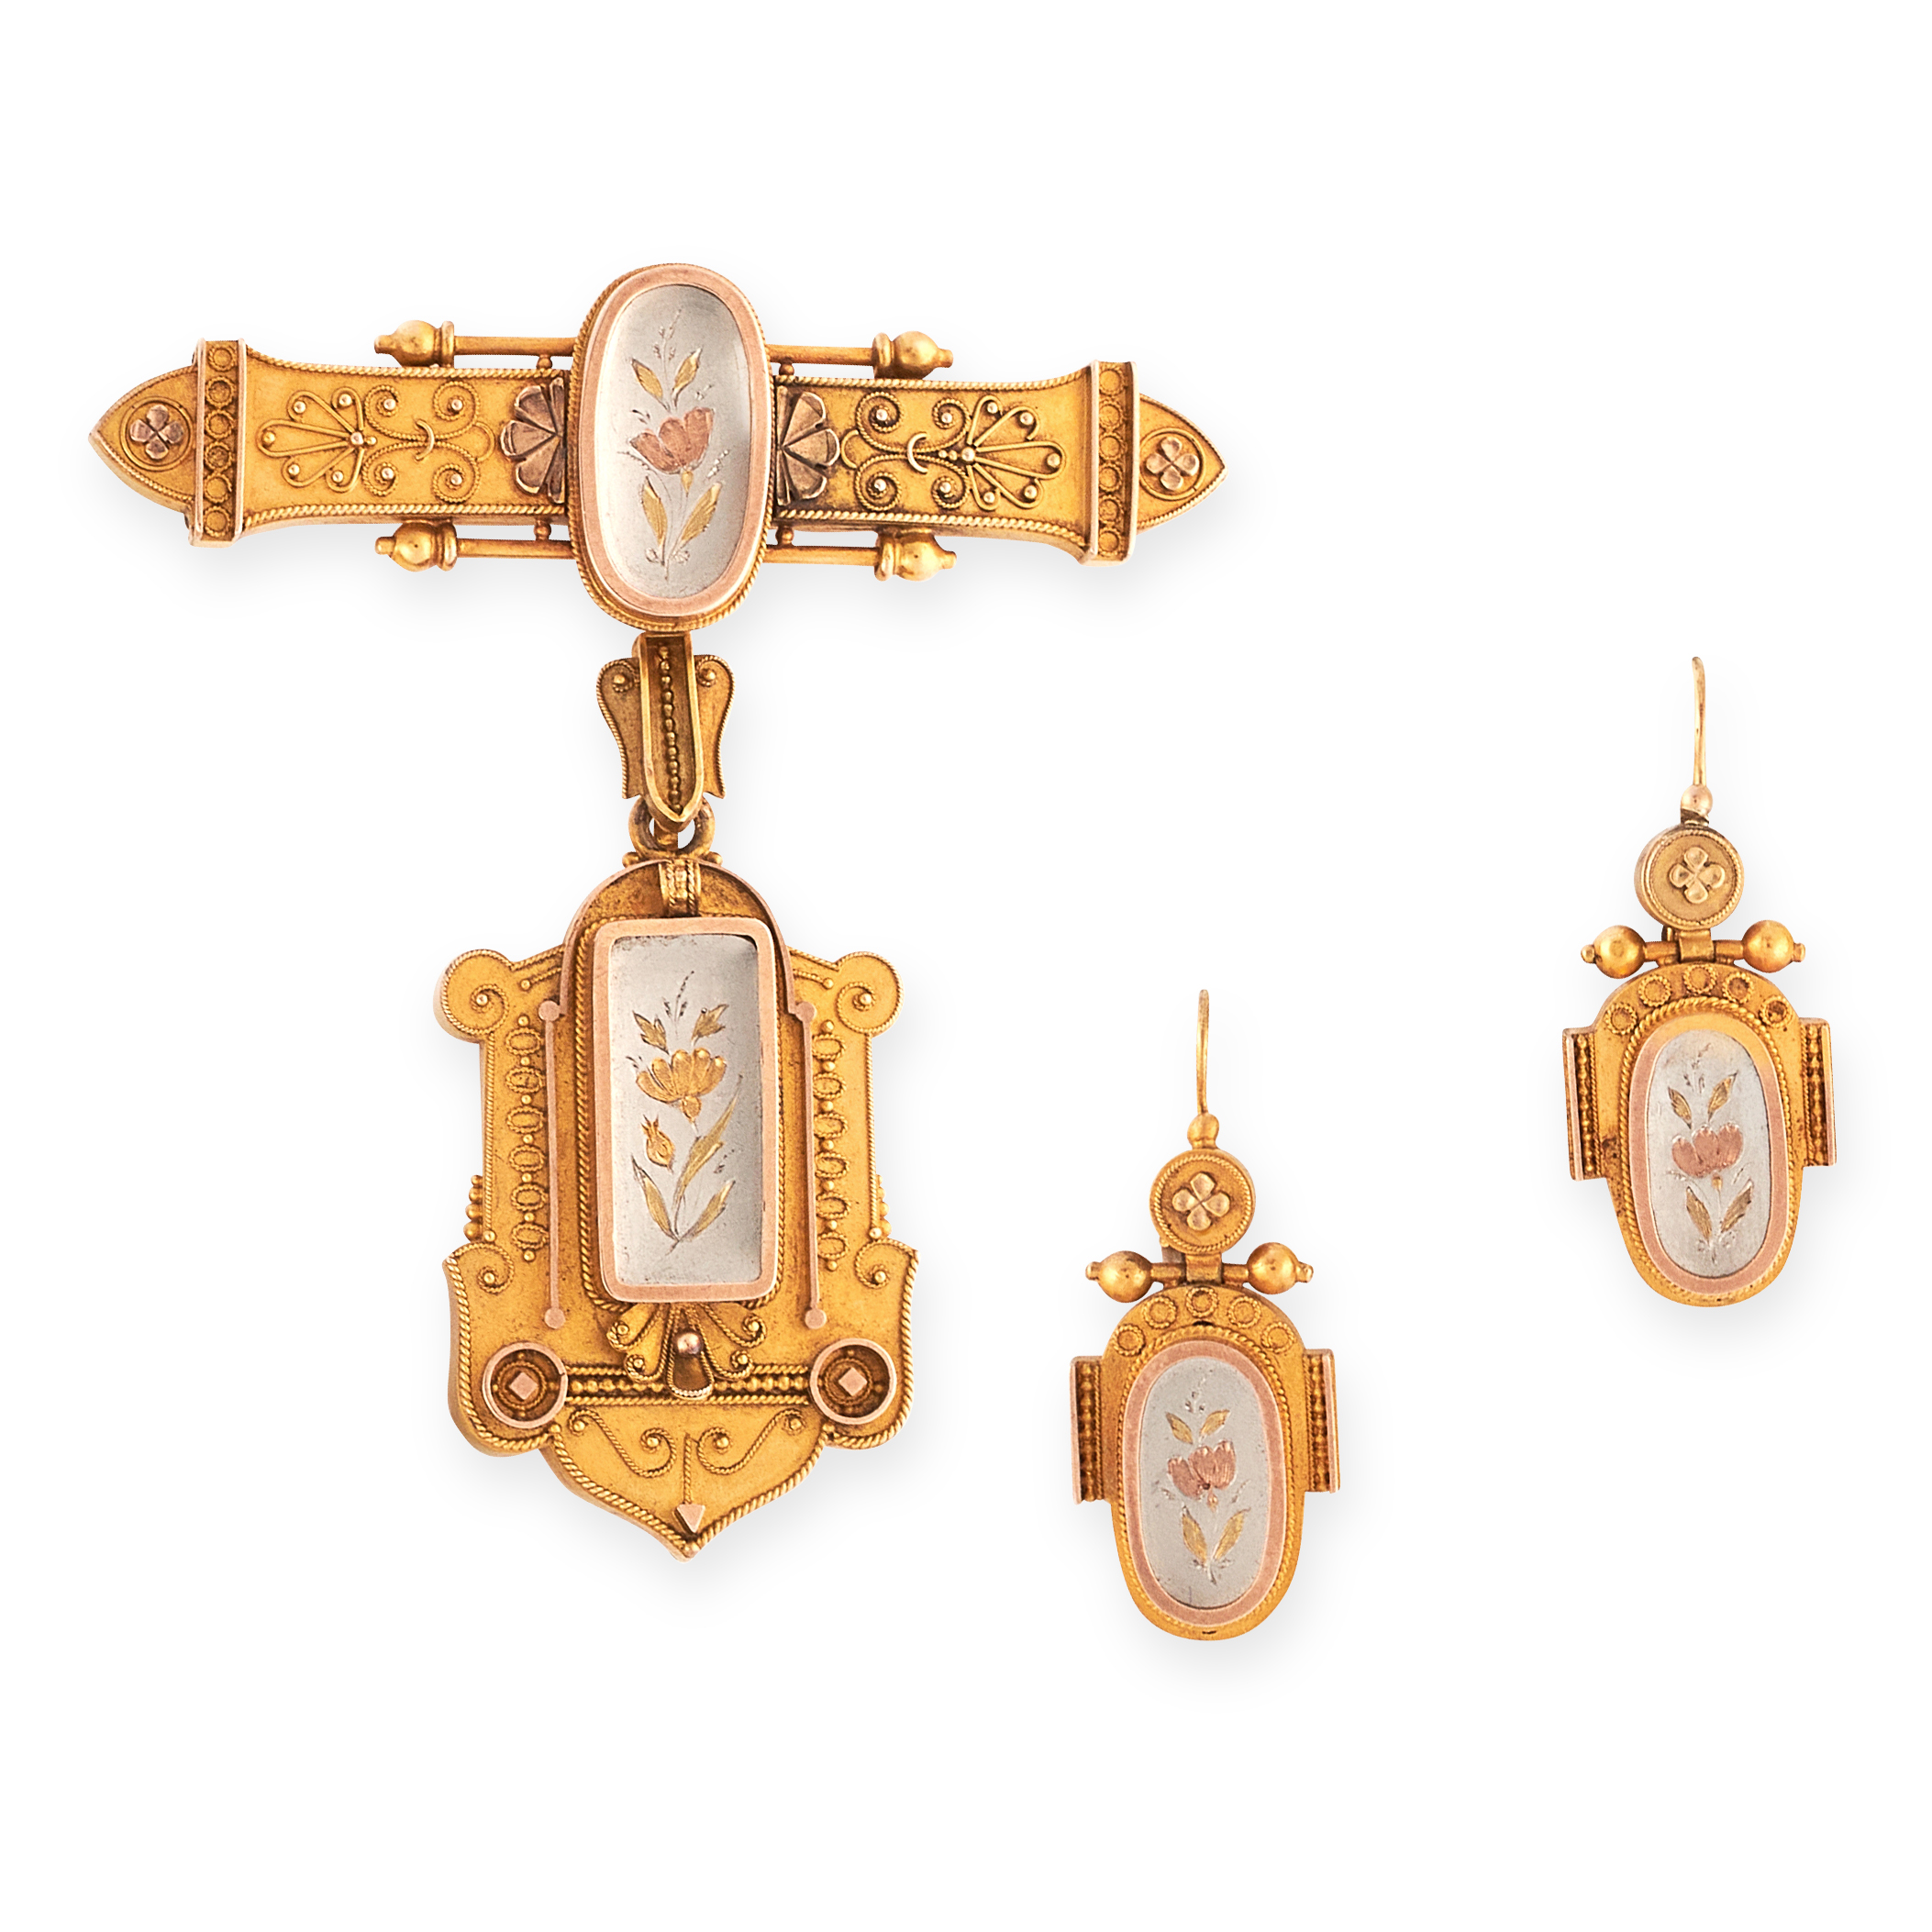 AN ANTIQUE MOURNING LOCKET BROOCH AND EARRINGS SUITE, 19TH CENTURY in high carat yellow gold, in the